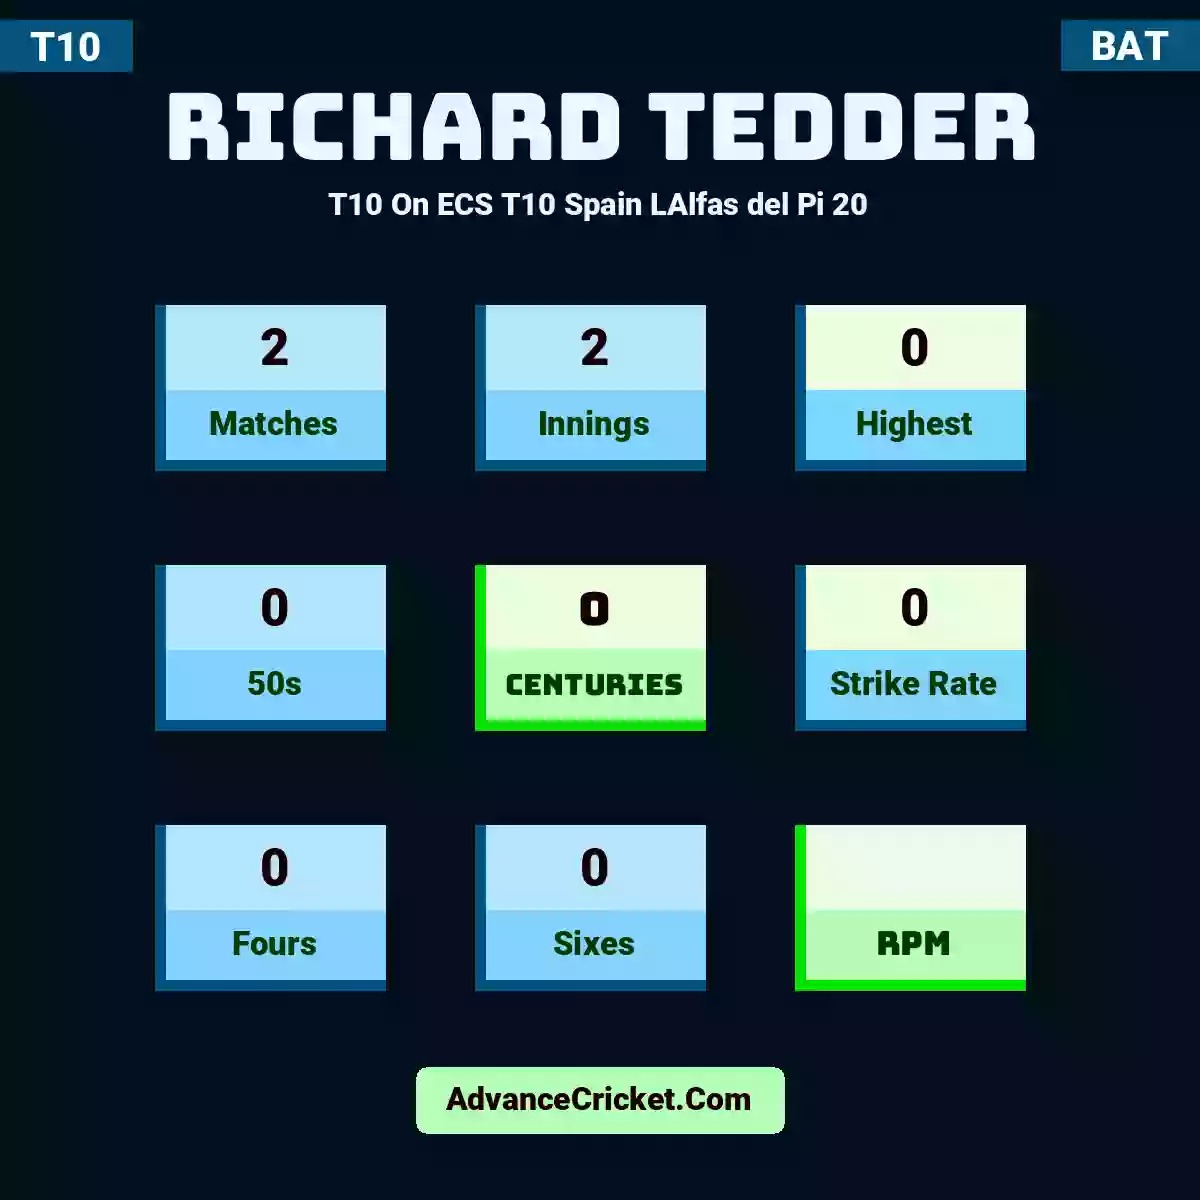 Richard Tedder T10  On ECS T10 Spain LAlfas del Pi 20, Richard Tedder played 2 matches, scored 0 runs as highest, 0 half-centuries, and 0 centuries, with a strike rate of 0. R.Tedder hit 0 fours and 0 sixes.